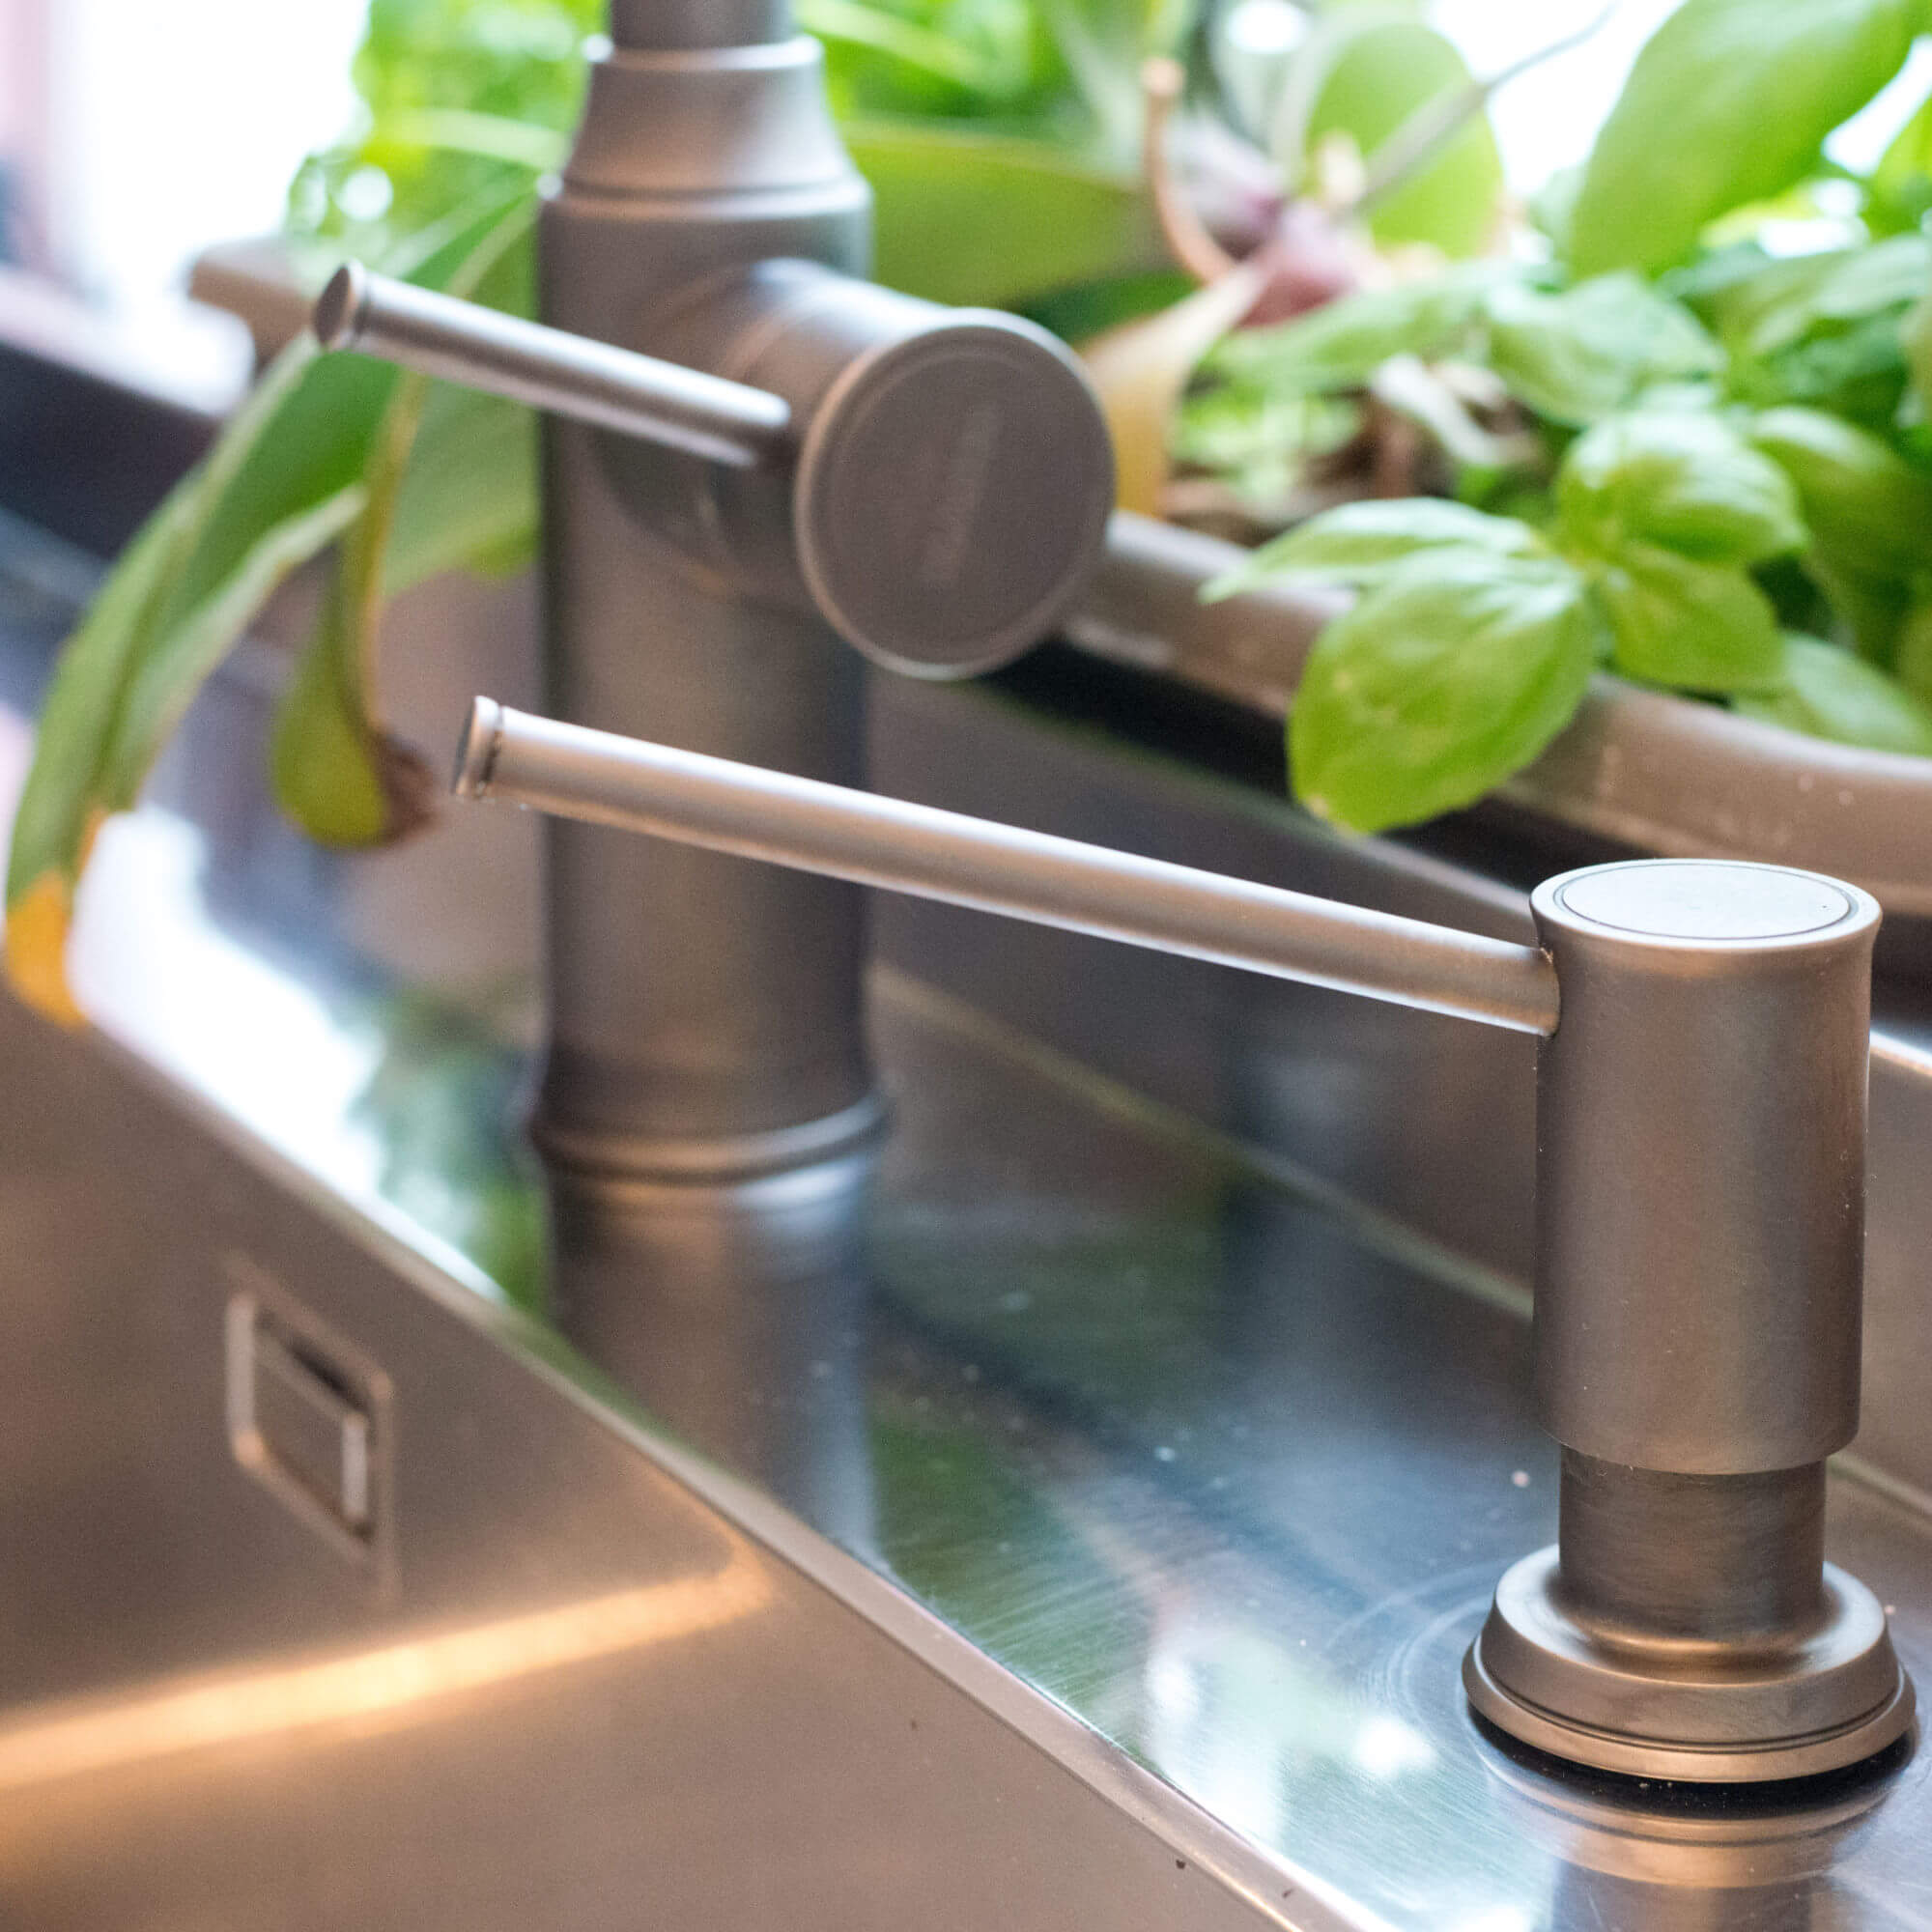 Stainless Steel Sink and Tap Detail